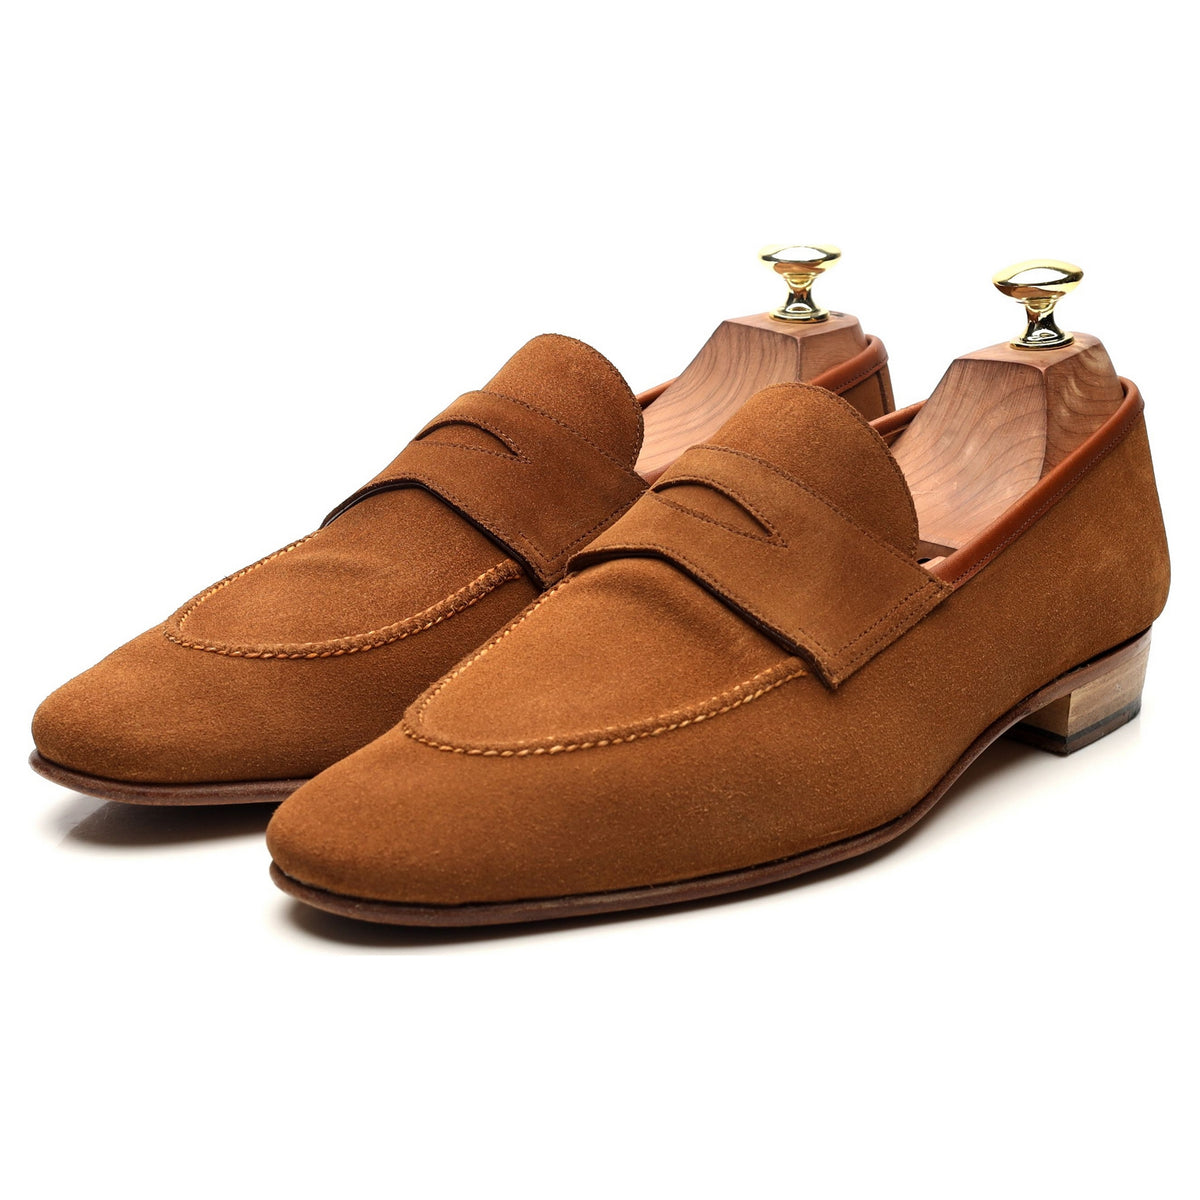 Sand Brown Suede Loafers UK 7.5